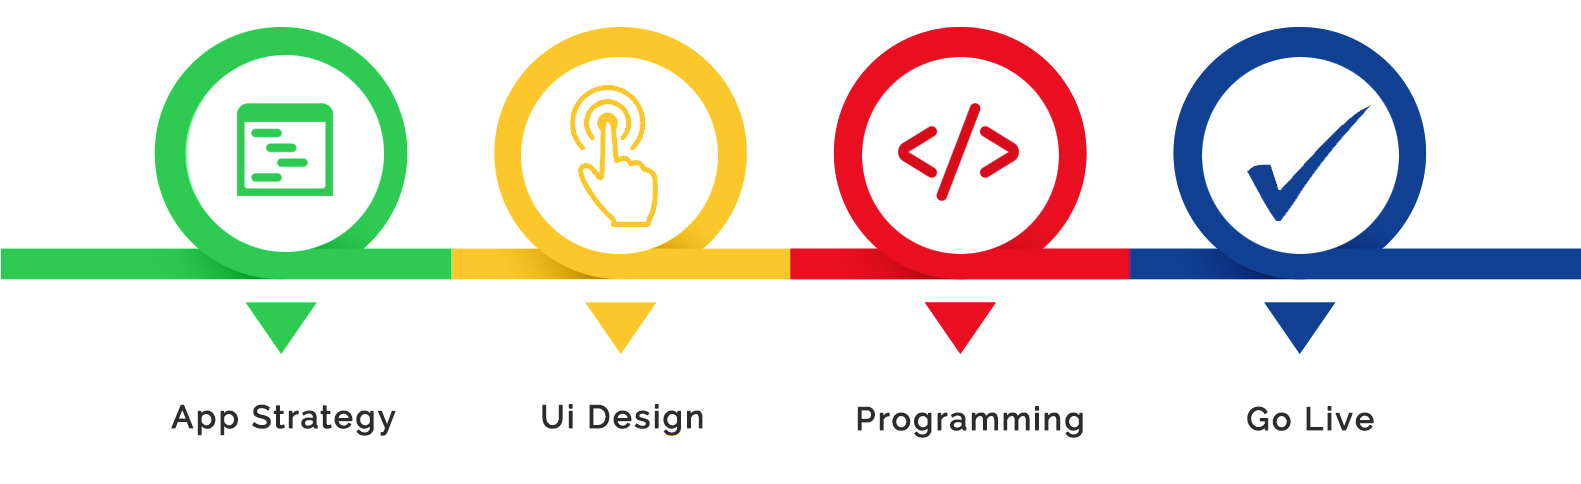 Software Development Services Life Cycle